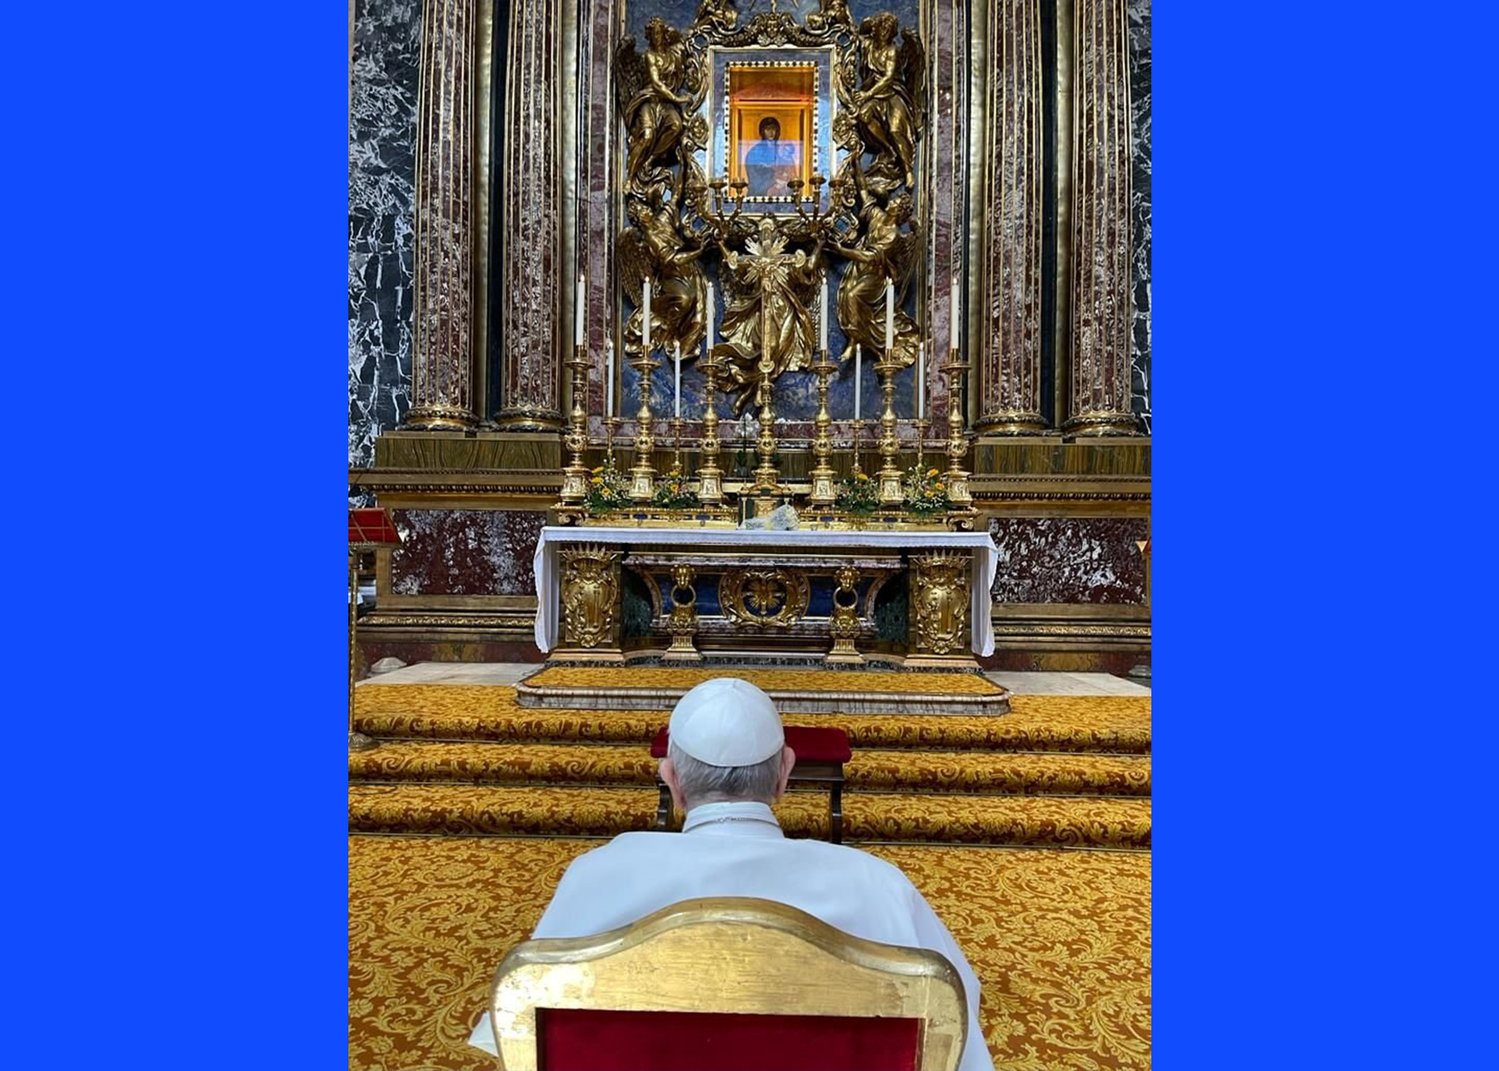 Pope Francis prays in front of the Marian icon “Salus Populi Romani” at the Basilica of St. Mary Major in Rome July 14, 2021. The pope visited the basilica after his release from Rome’s Gemelli hospital following his recovery from colon surgery.